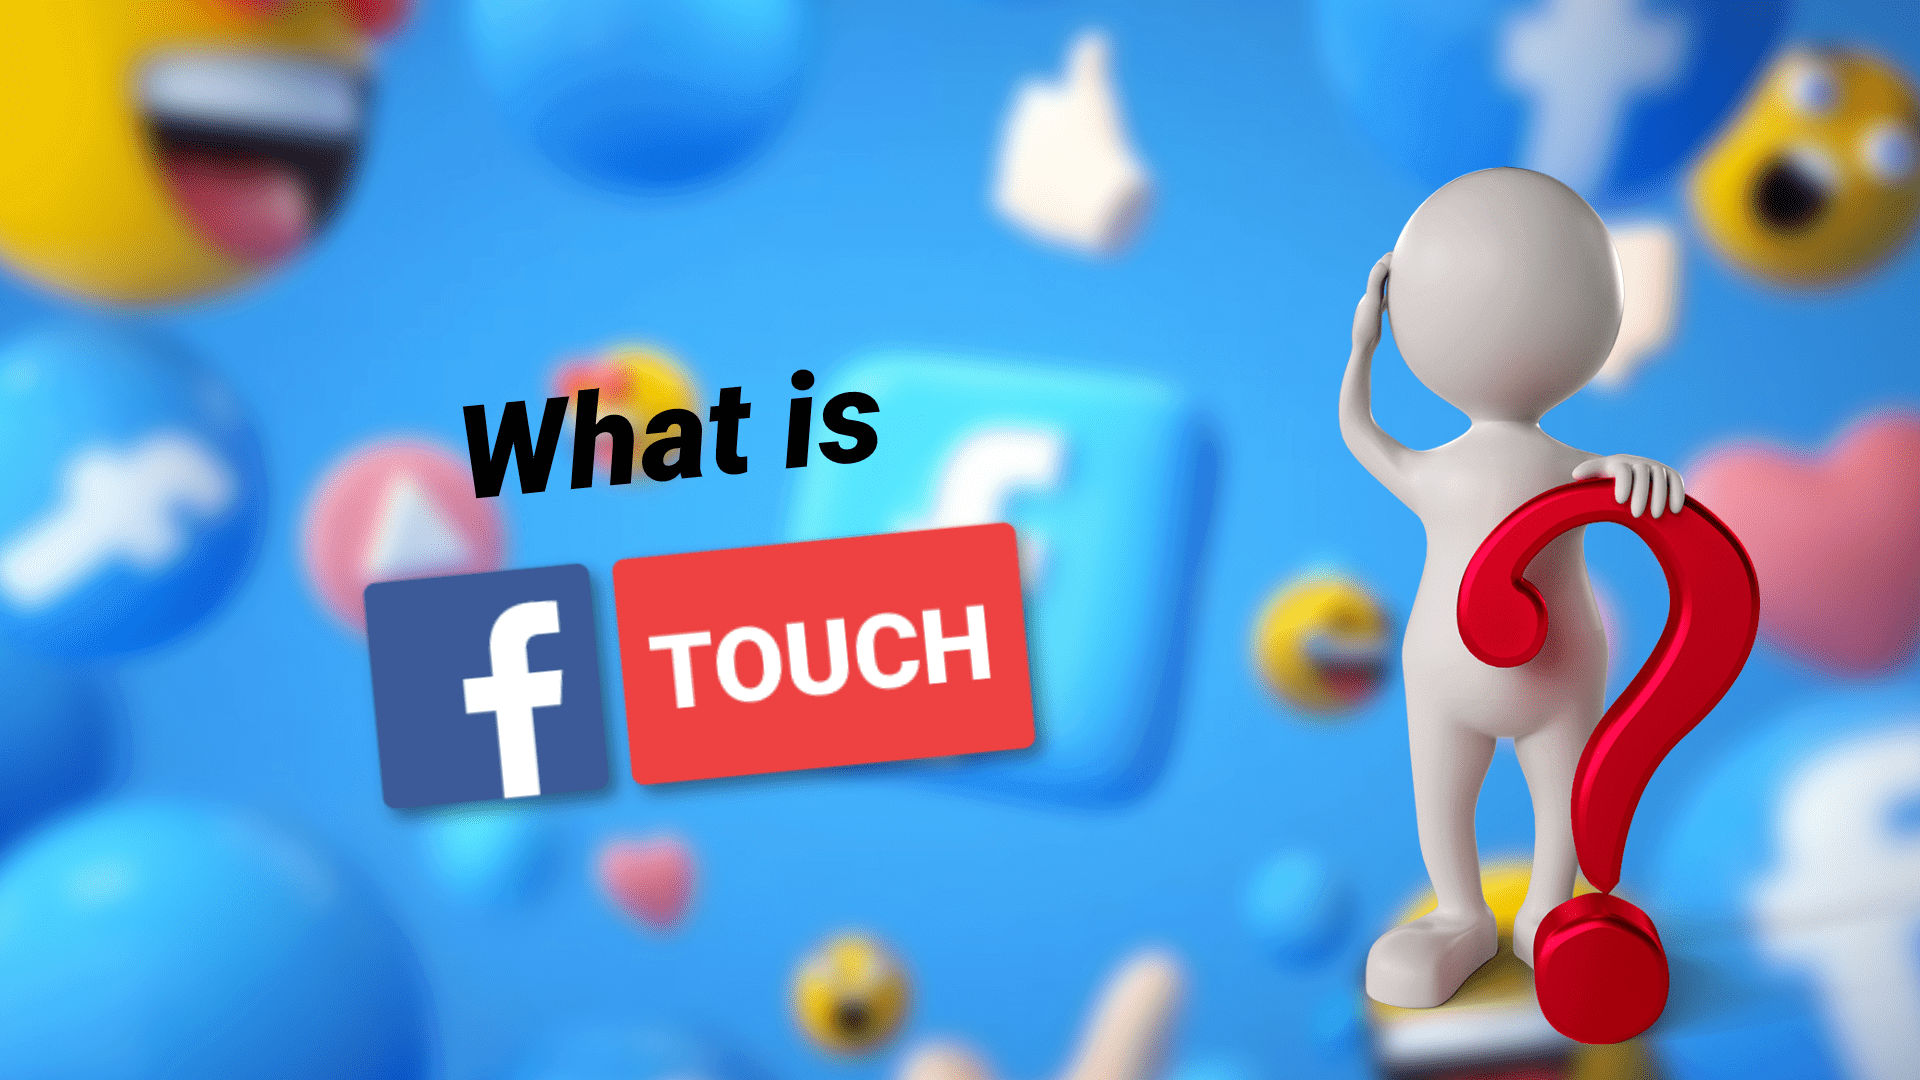 Facebook touch